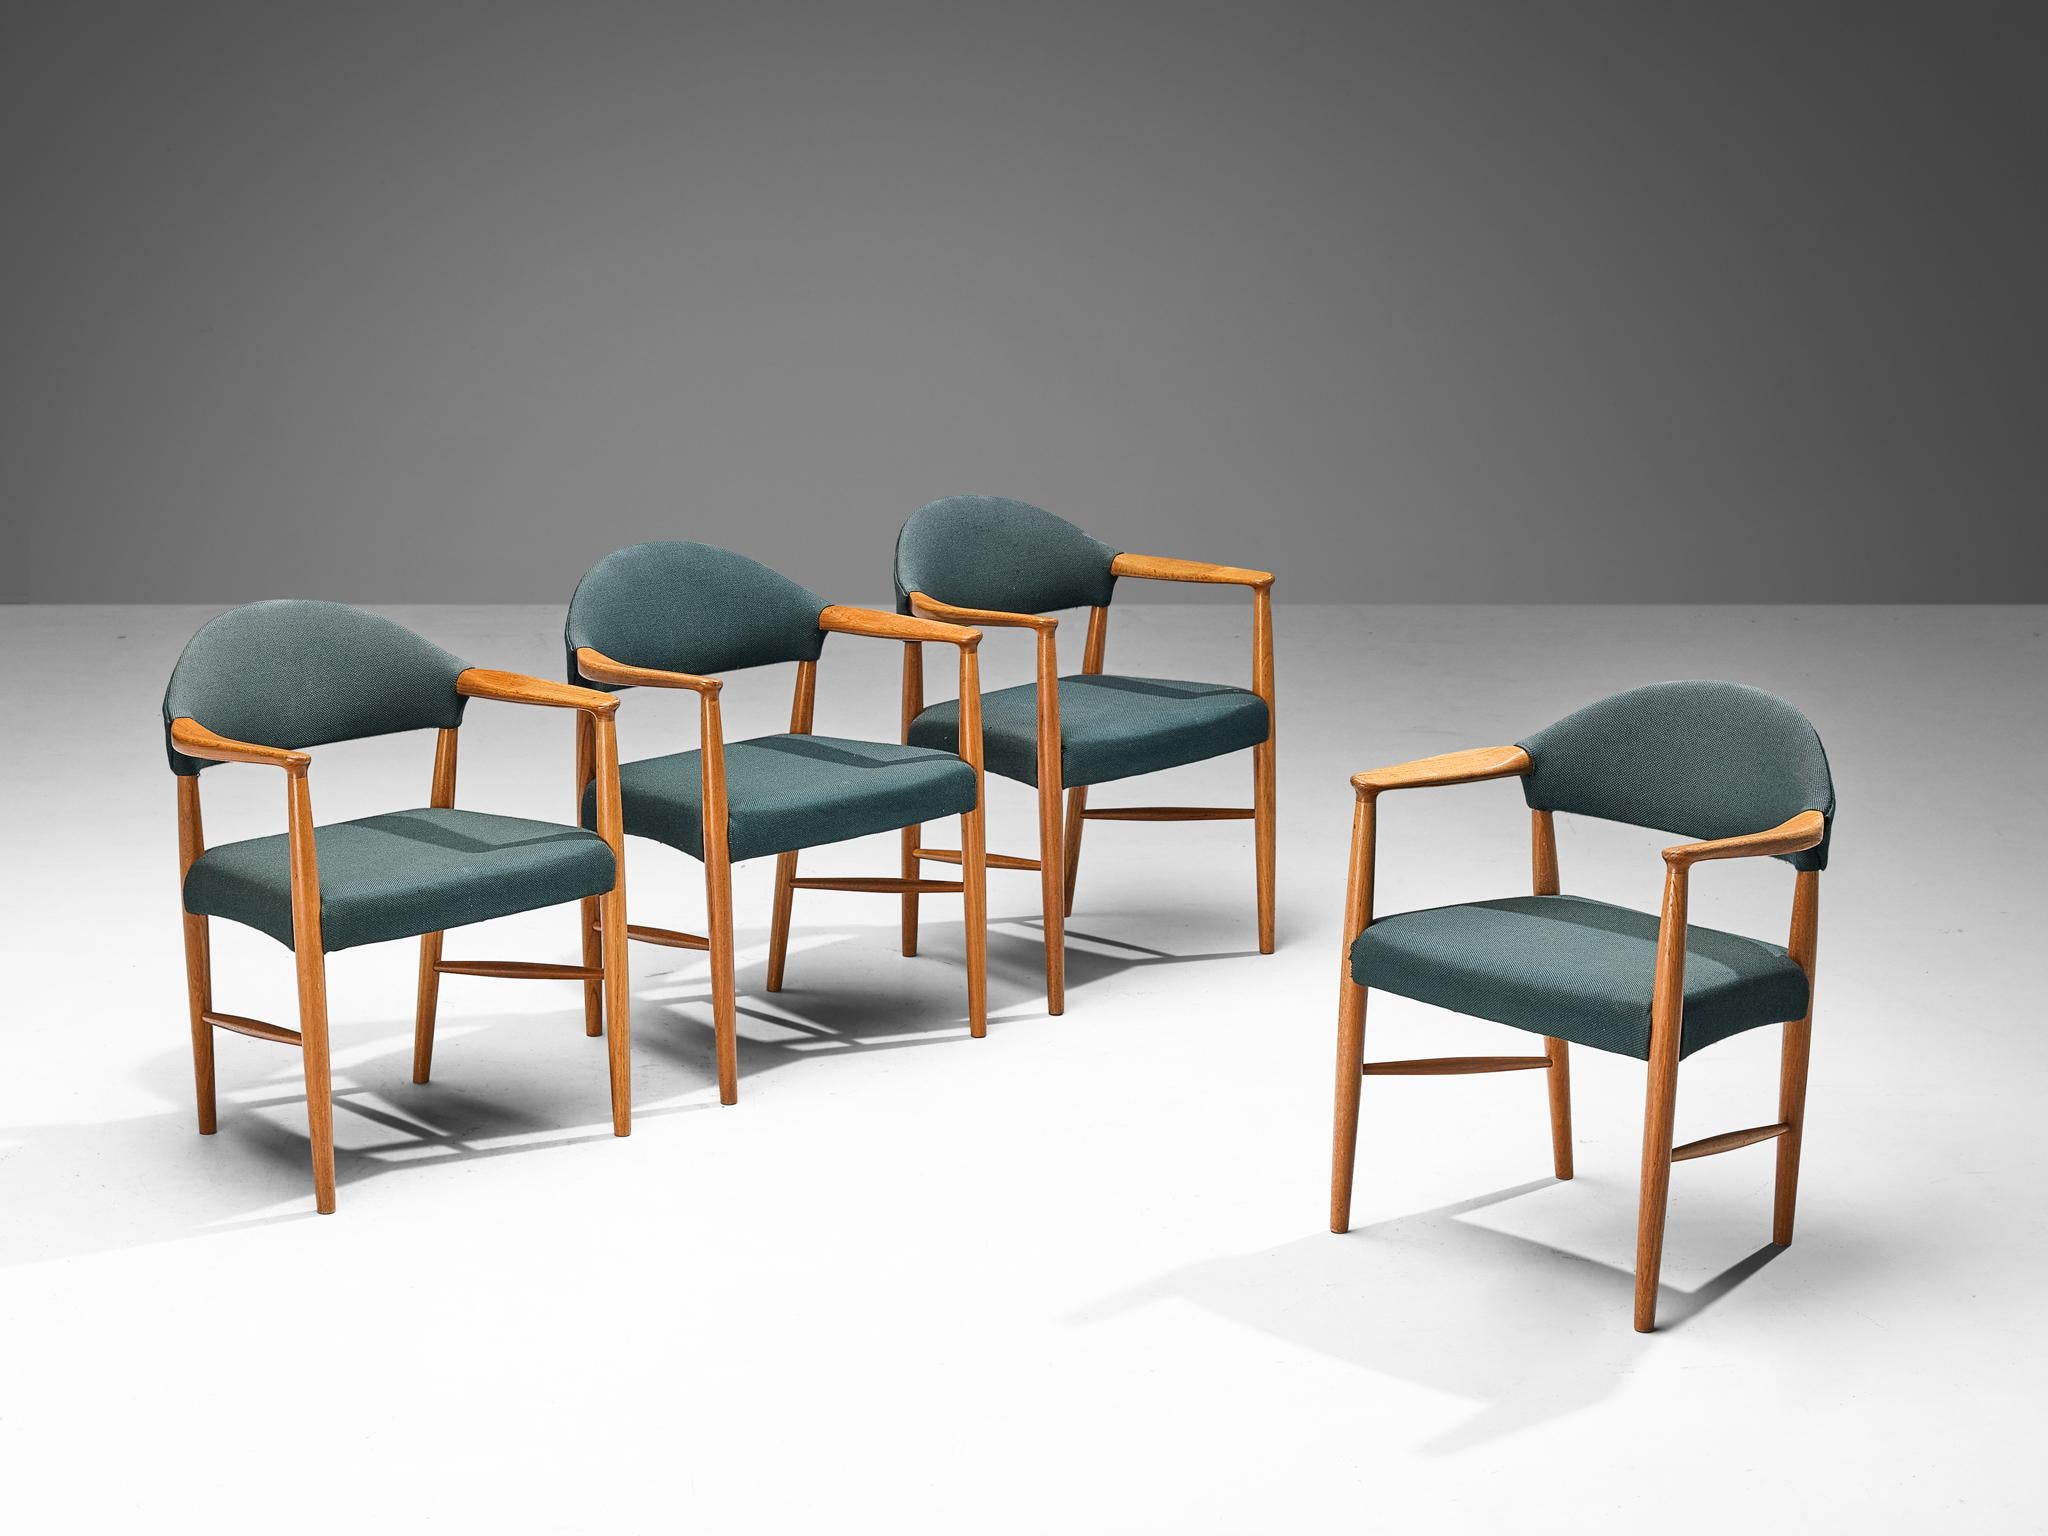 Kurt Olsen for Slagelse Mobelvaerk, set of four '223' dining or armchairs, fabric, teak, Denmark, 1960s

Set of four dining or armchairs designed by Kurt Olsen in the 1960s. These chairs are simplistic and elegant in their execution. The frames of